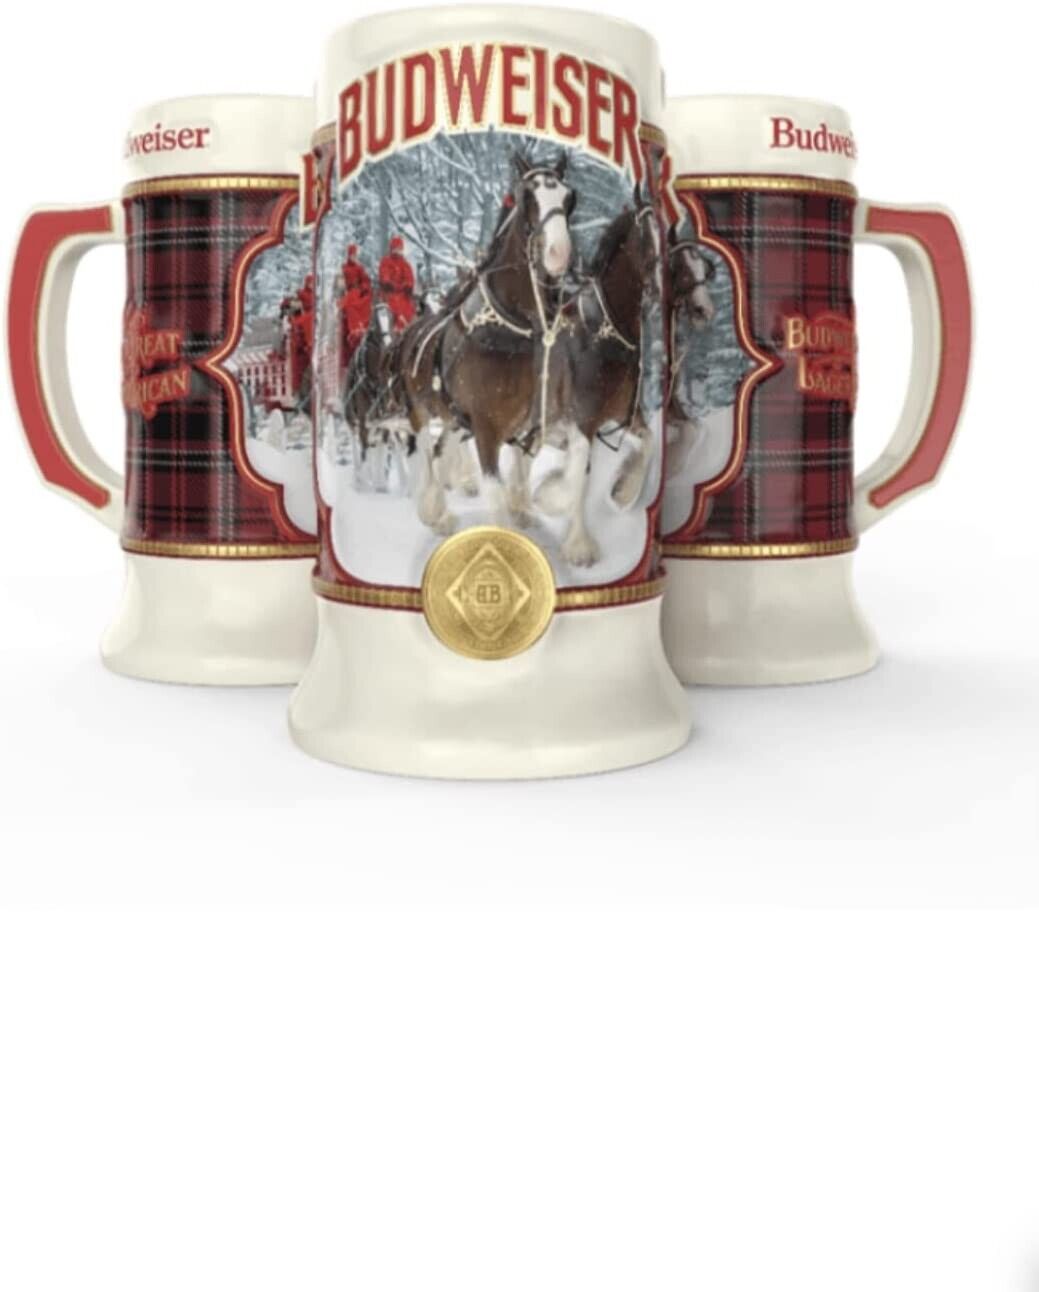 Christmas Beer Stein & Mug 2021 Collectors Plaid Holiday Best In Quality NIB